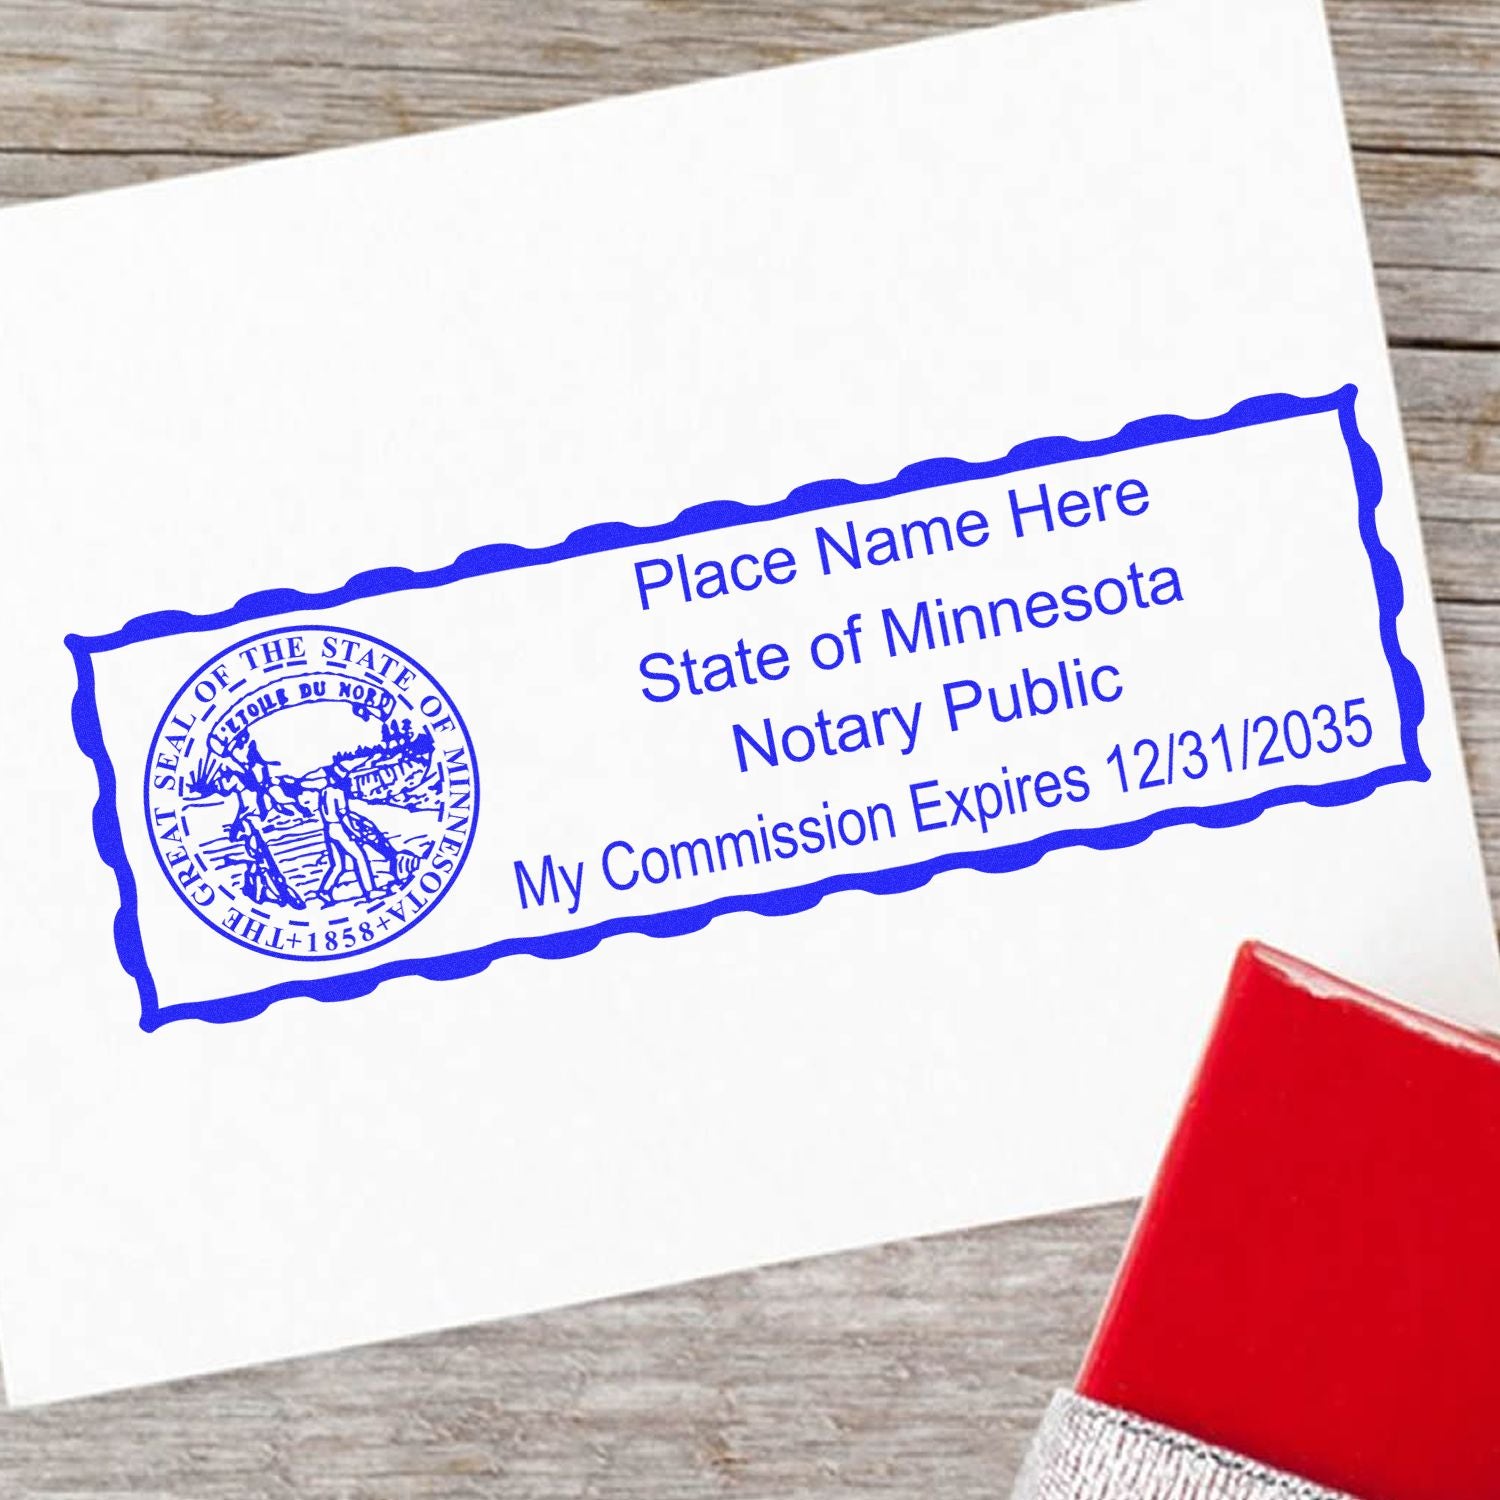 The main image for the Slim Pre-Inked State Seal Notary Stamp for Minnesota depicting a sample of the imprint and electronic files